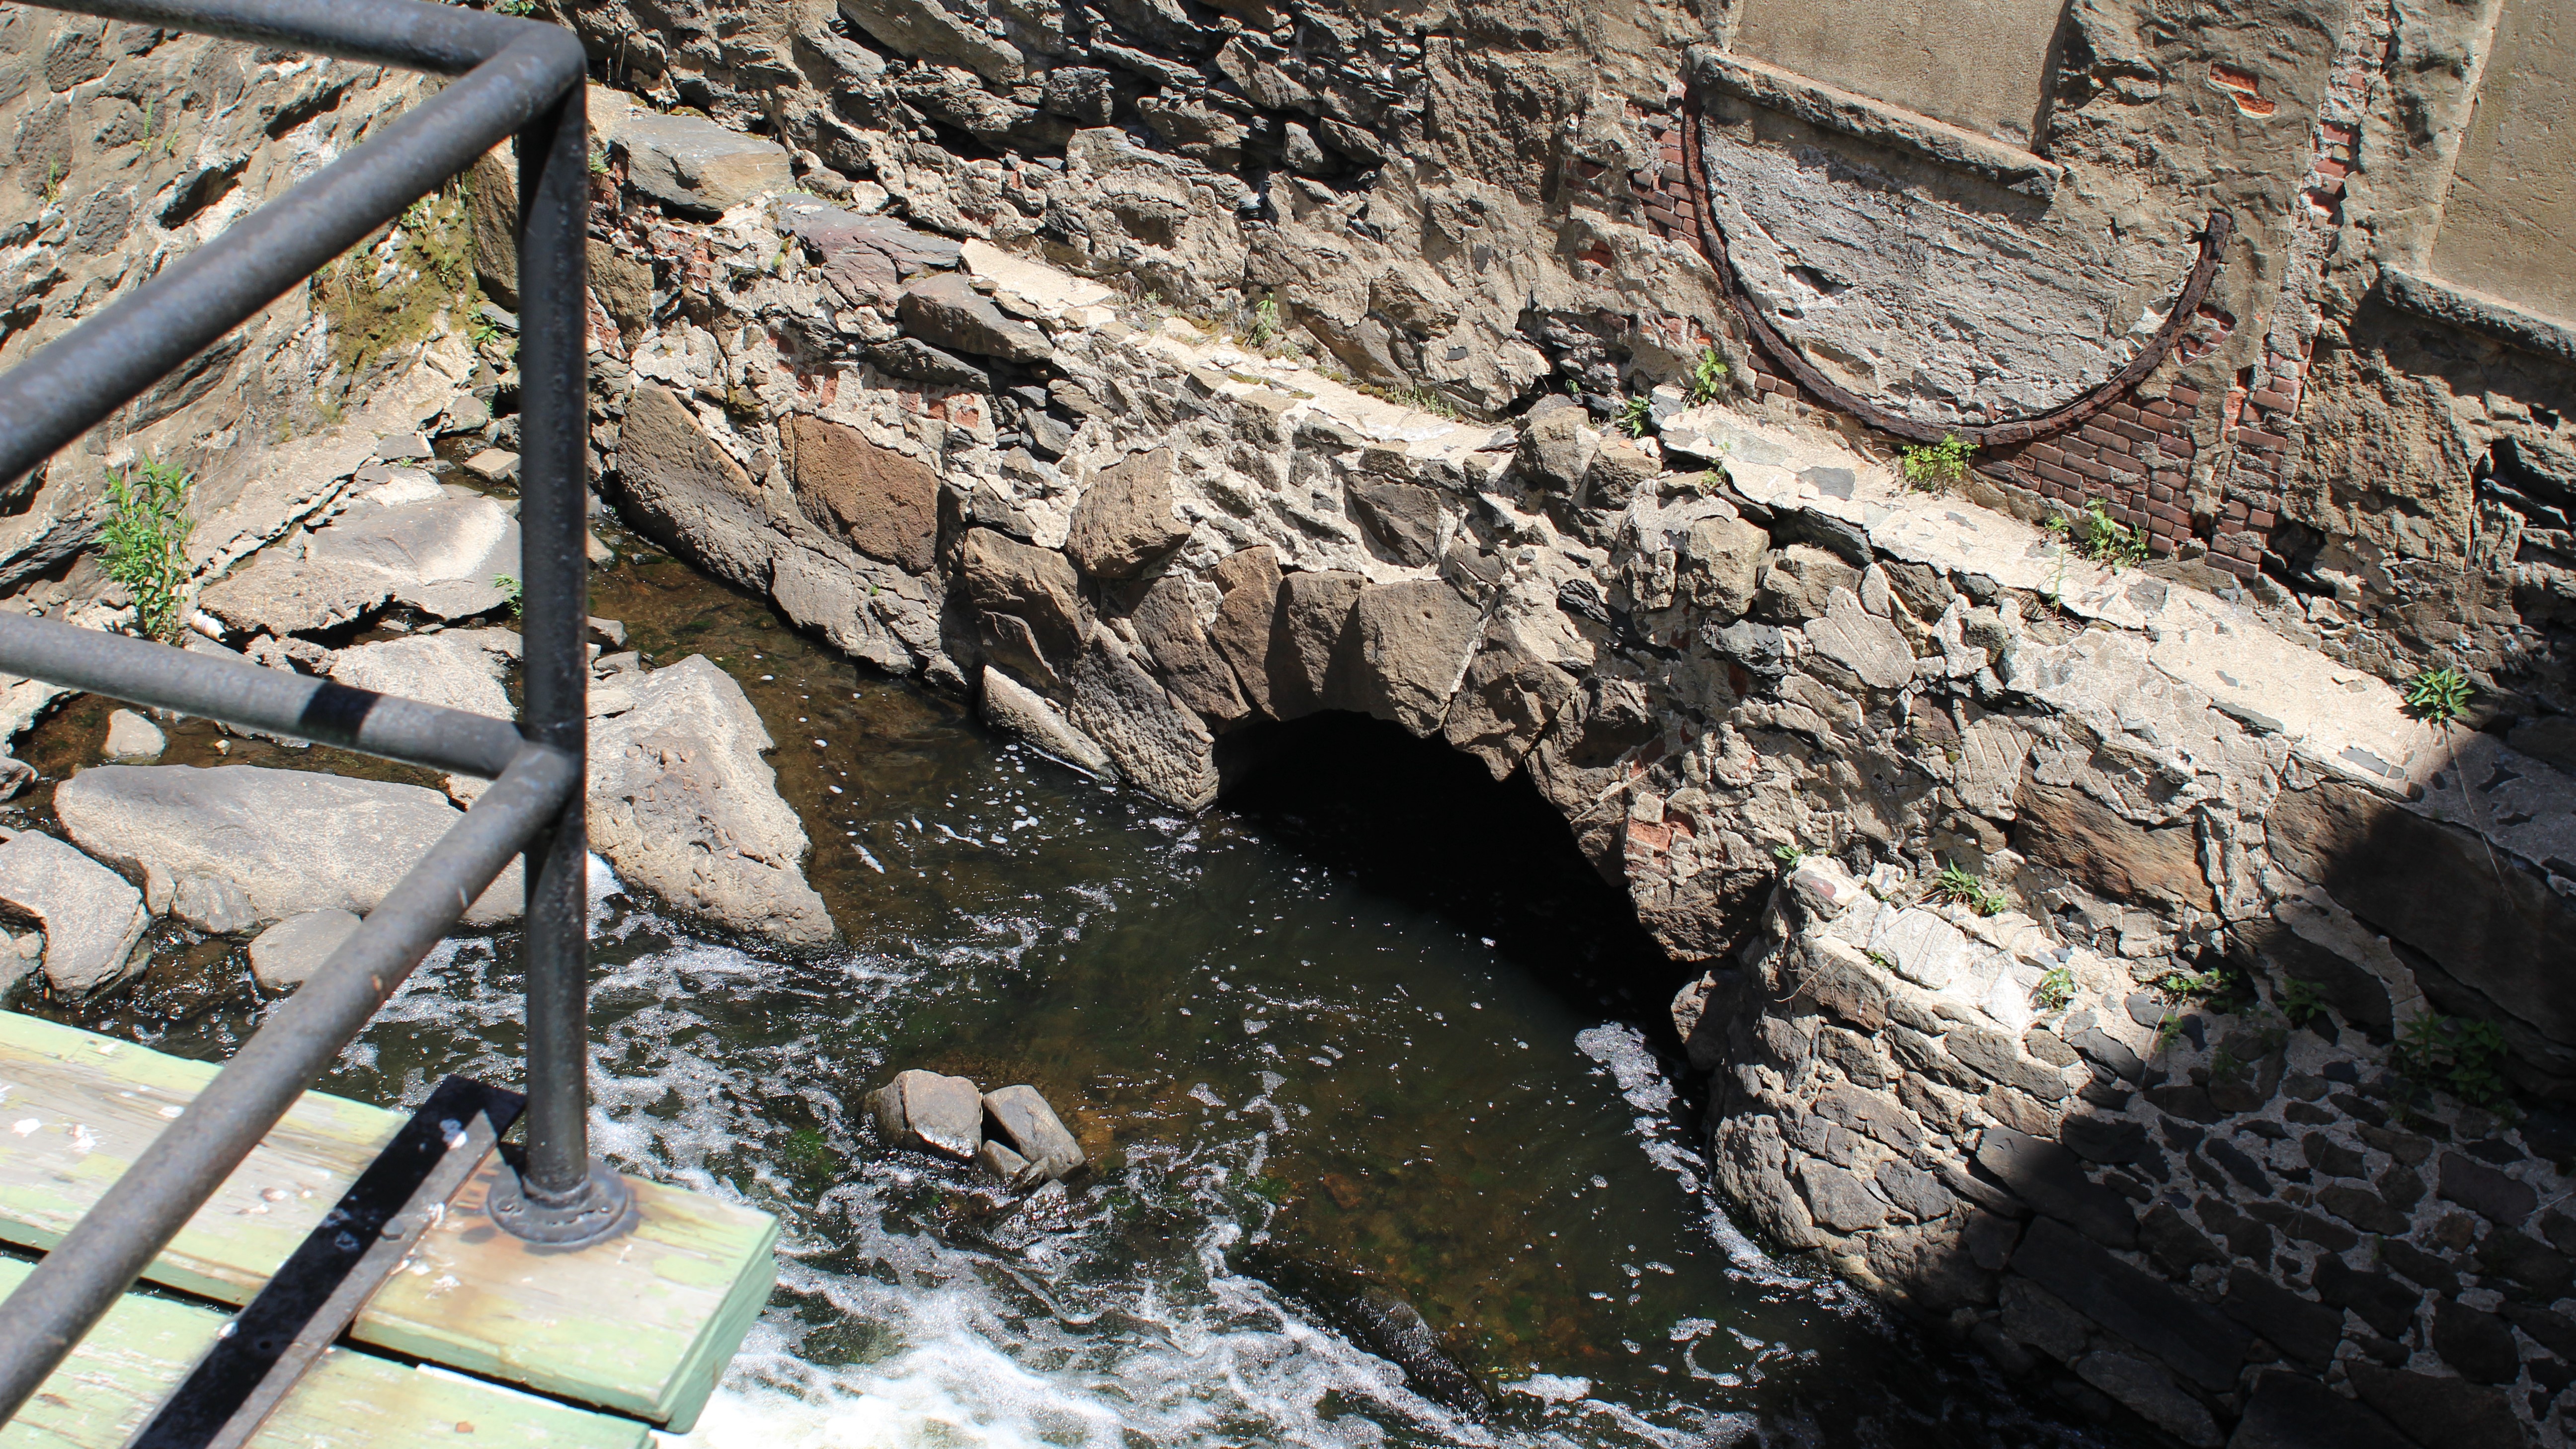 The Quequechan River now flows through downtown Fall River in a series of pipes and culverts.